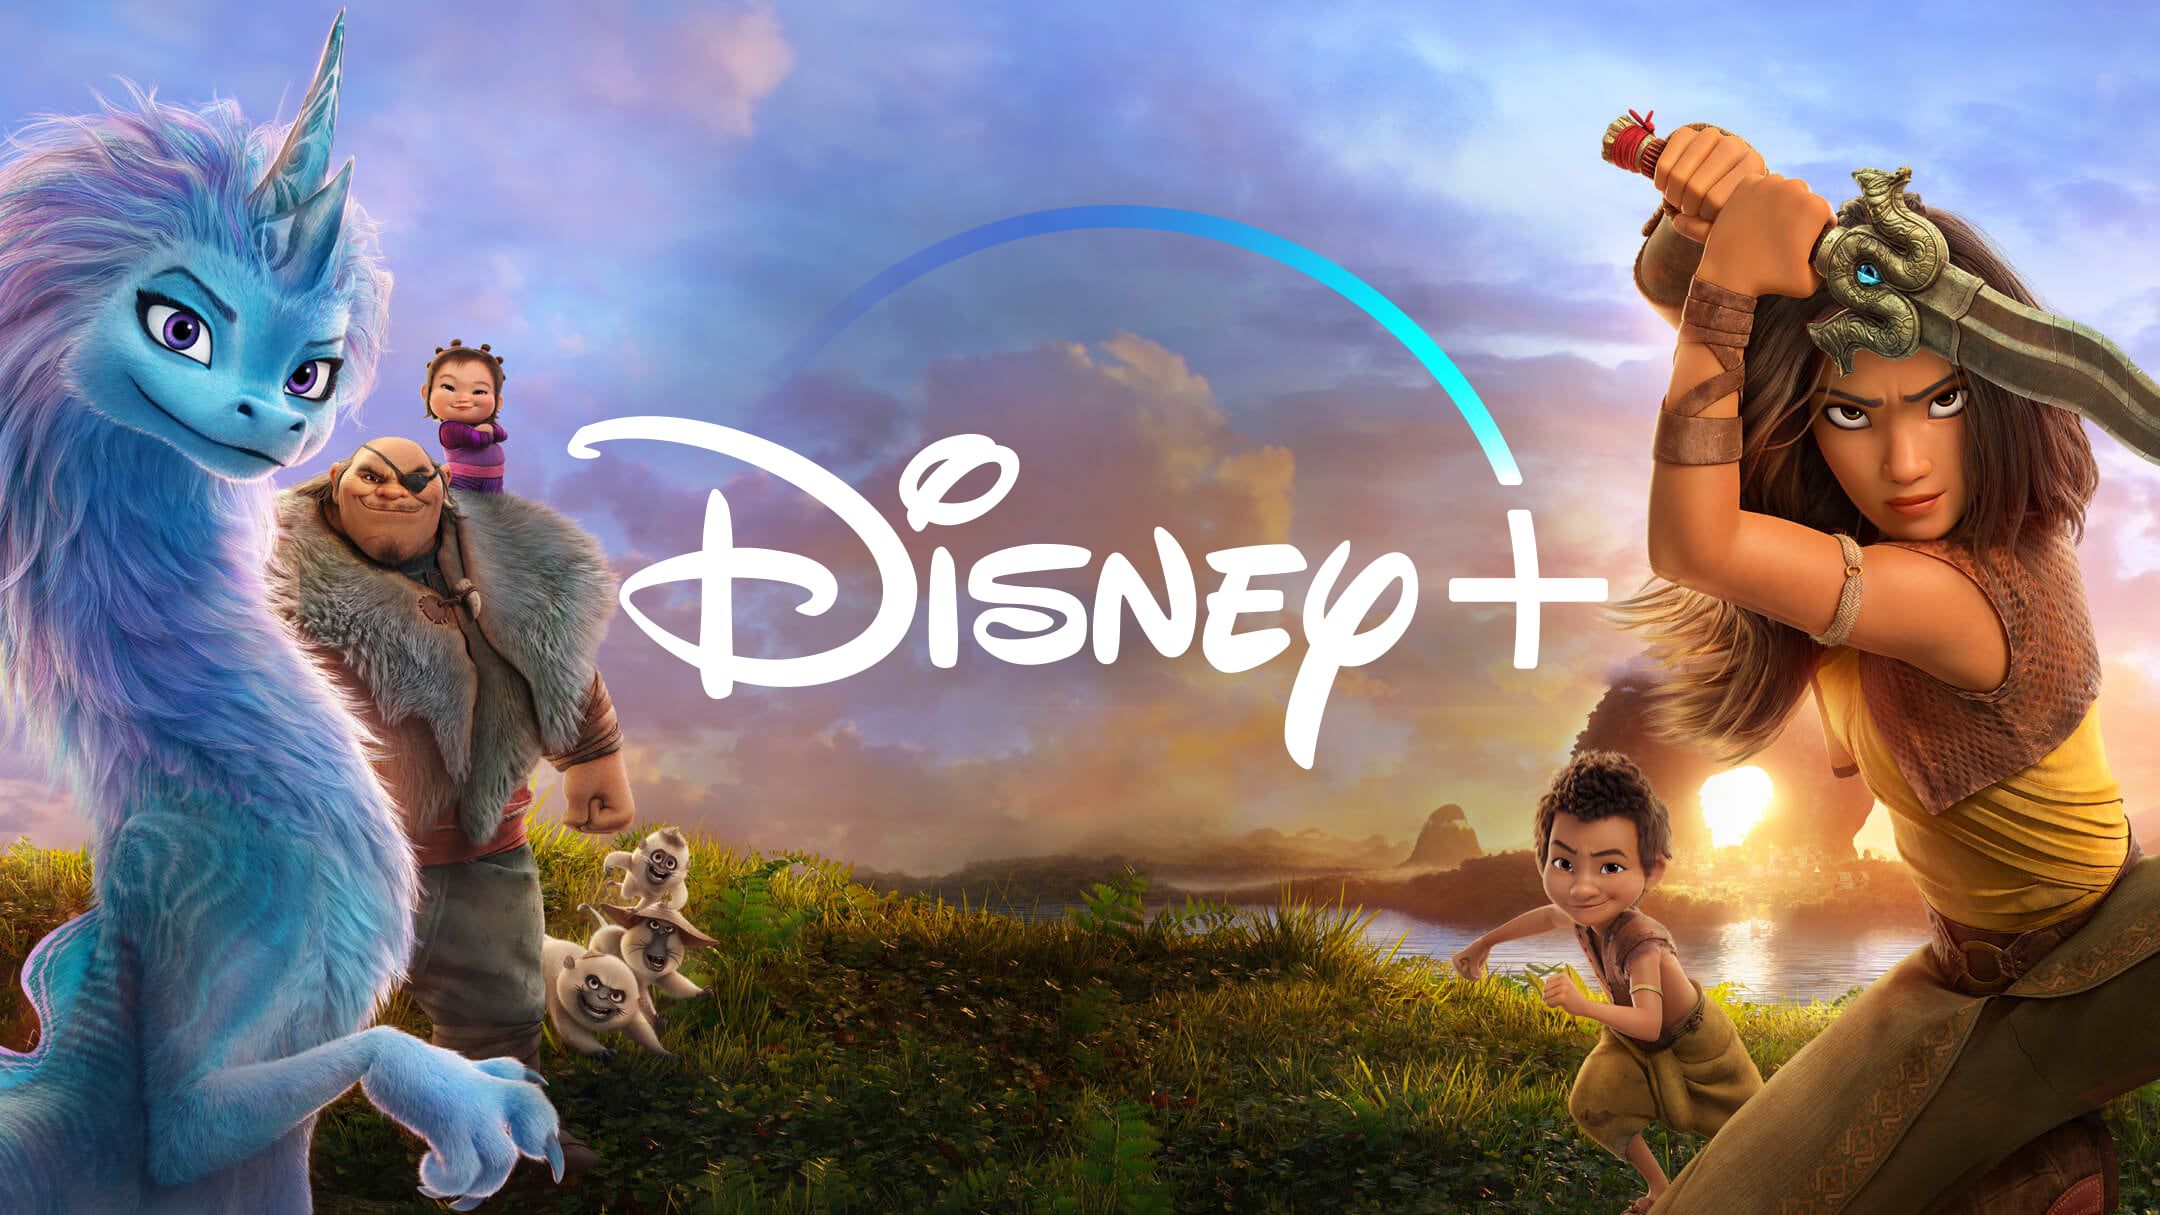 Disney+ Ad-Supported Plan to Limit Commercials to Four Minutes Per Hour